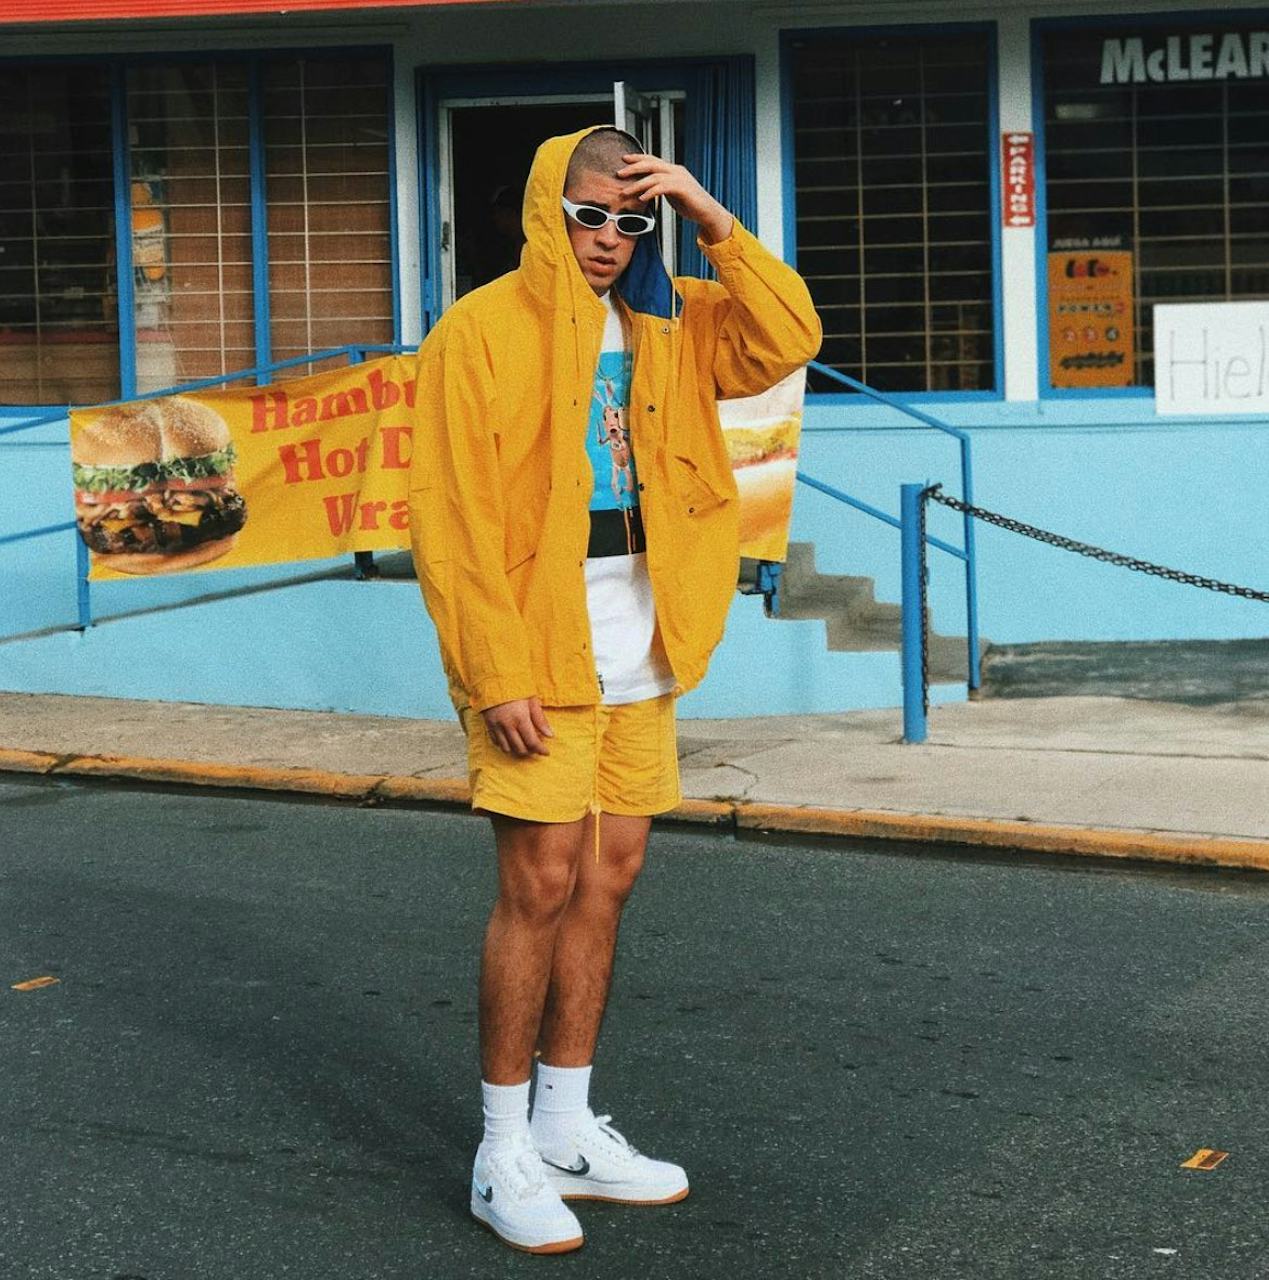 How to dress as good (and chill) as Bad Bunny